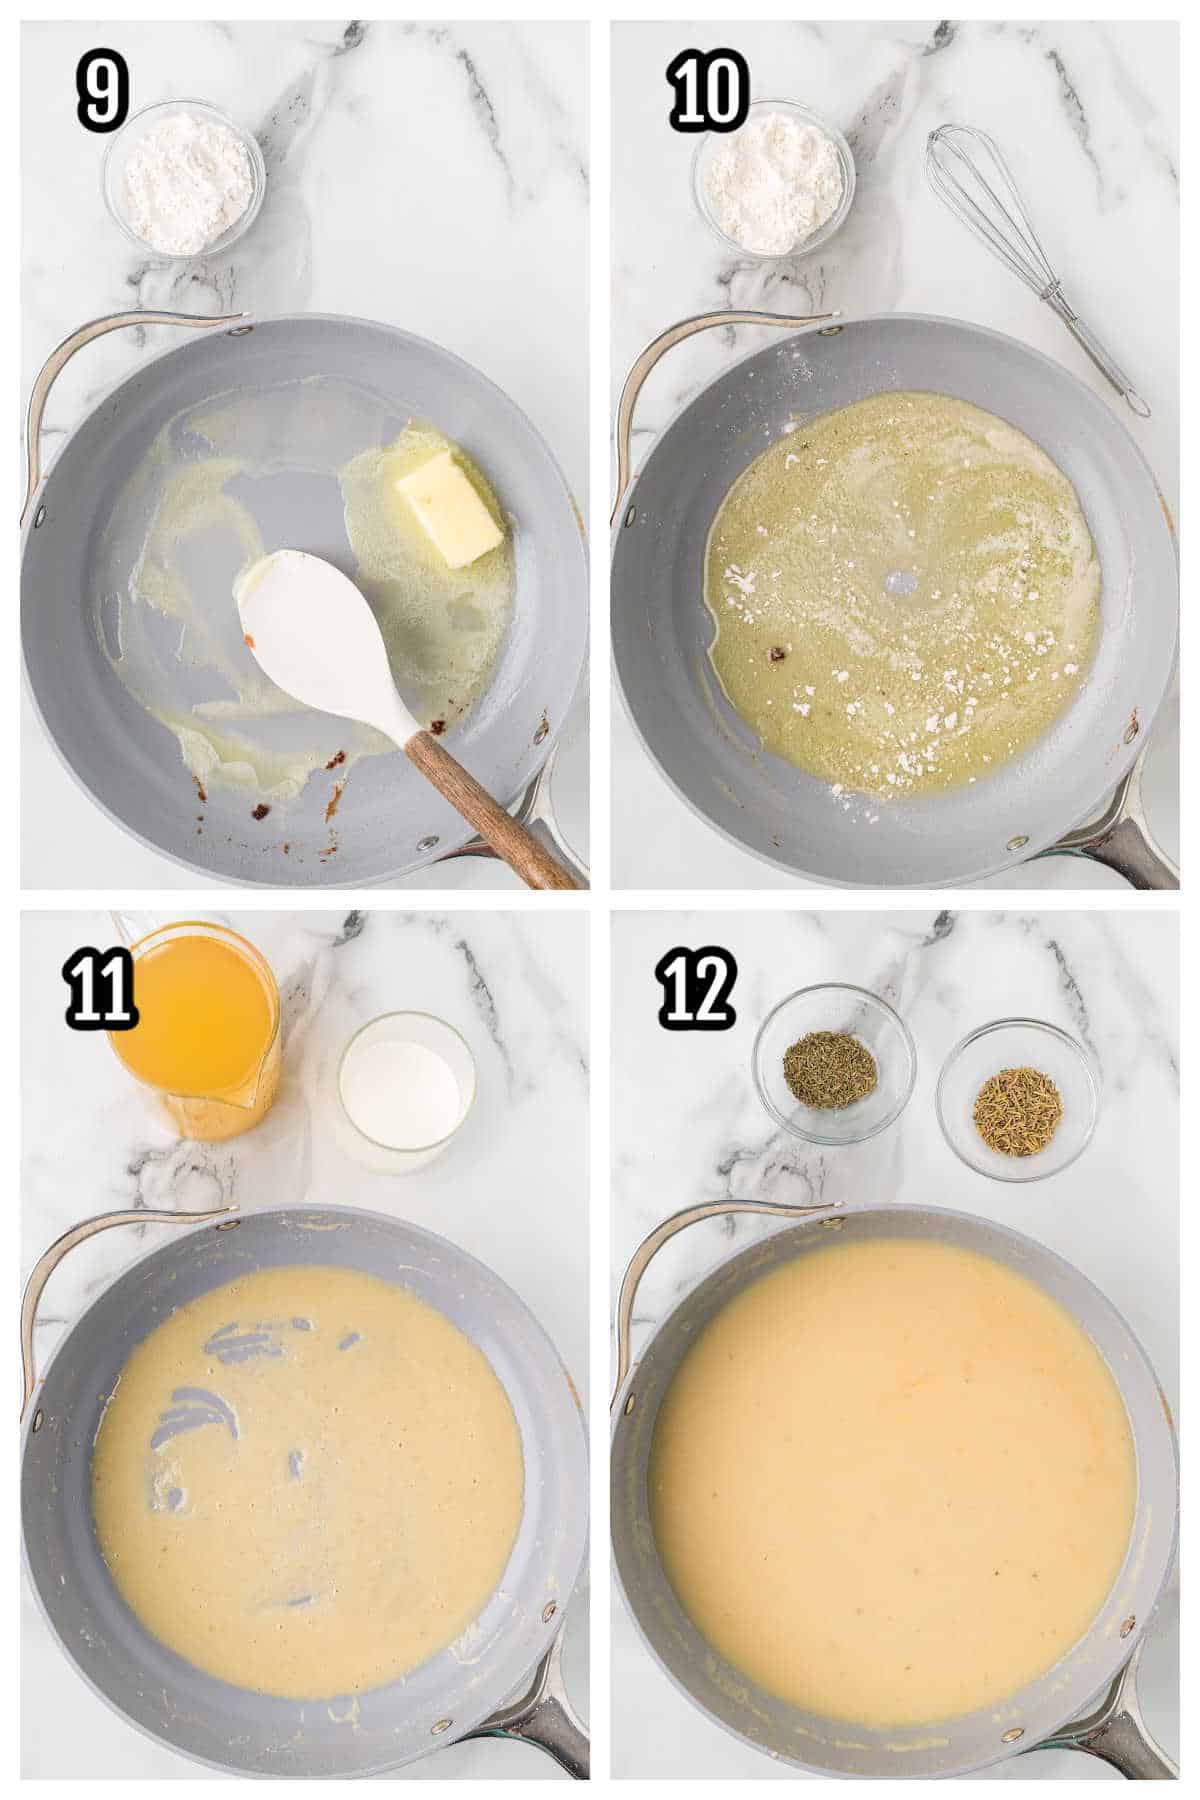 The third collage shows steps nine through twelve for the Southern Chicken in Gravy recipe. 